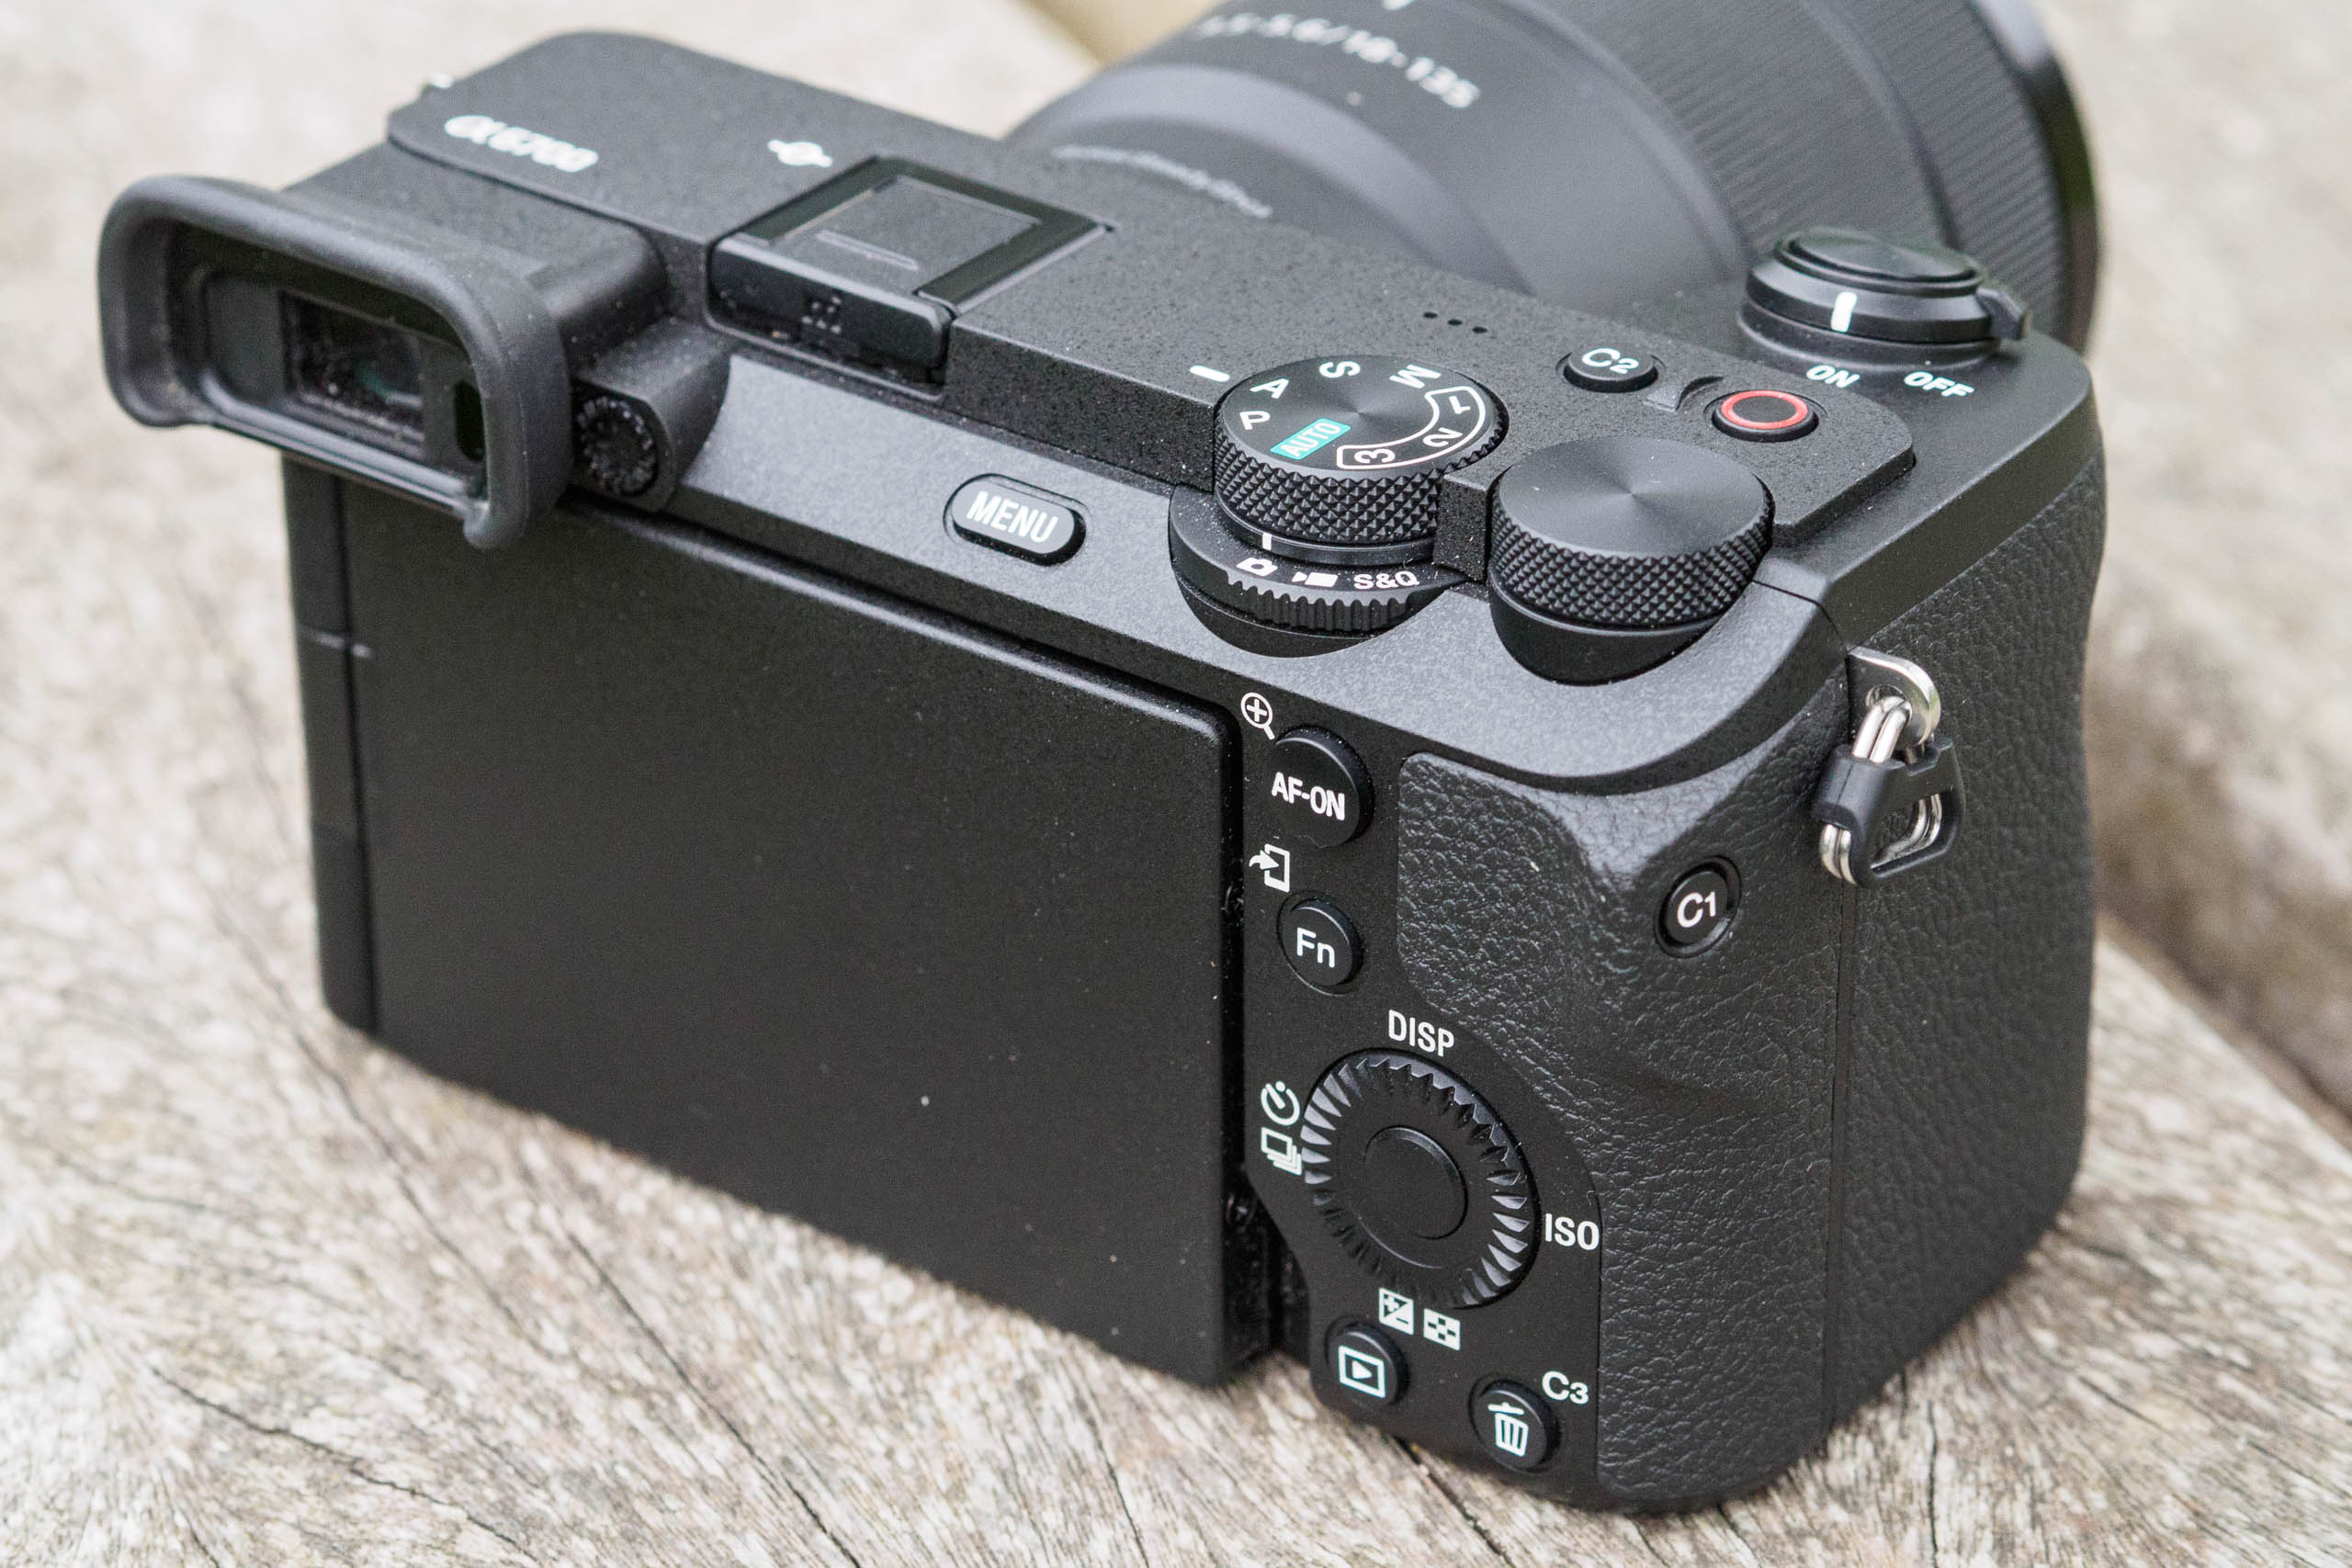 Sony a6700 Review: Exactly What You'd Expect